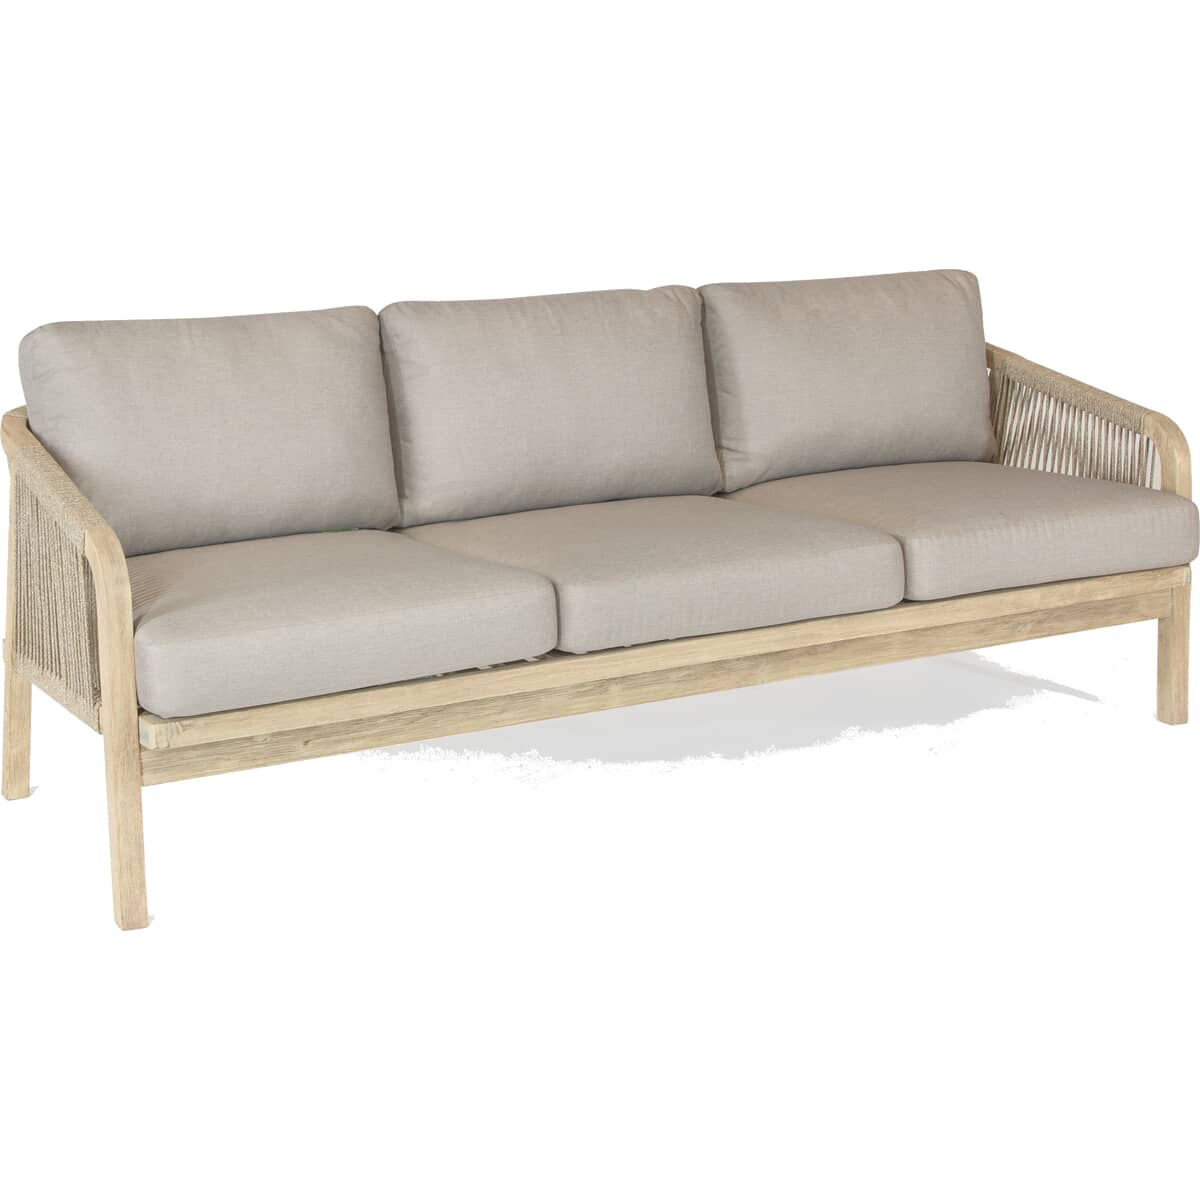 Kettler Cora Rope - 3 Seat Sofa with Cushions